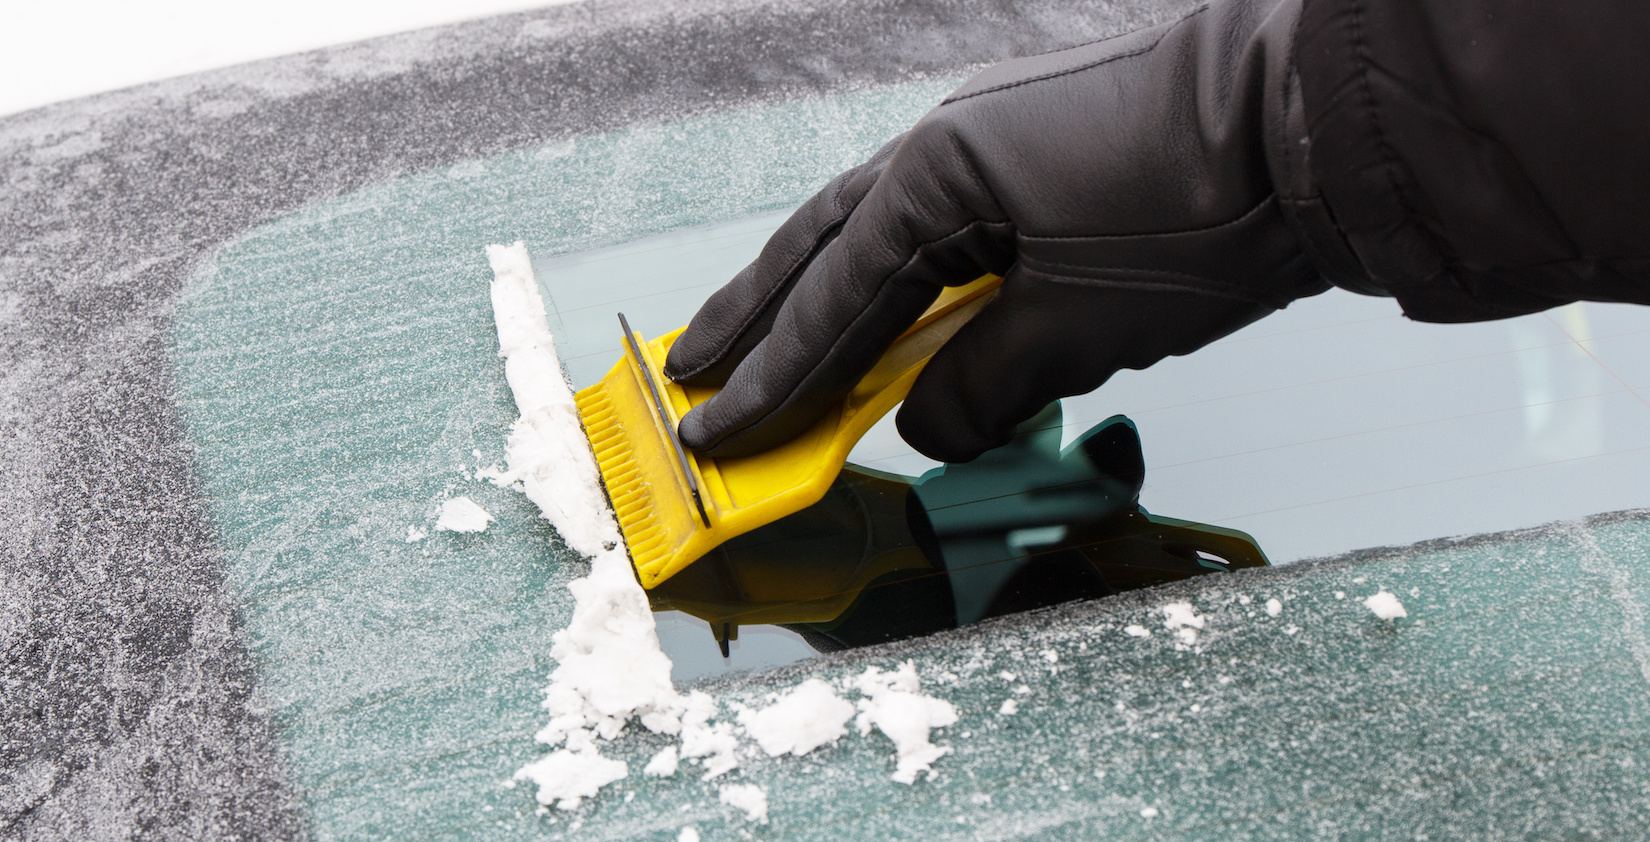 A person de-icing her windshield with a yellow scrapper